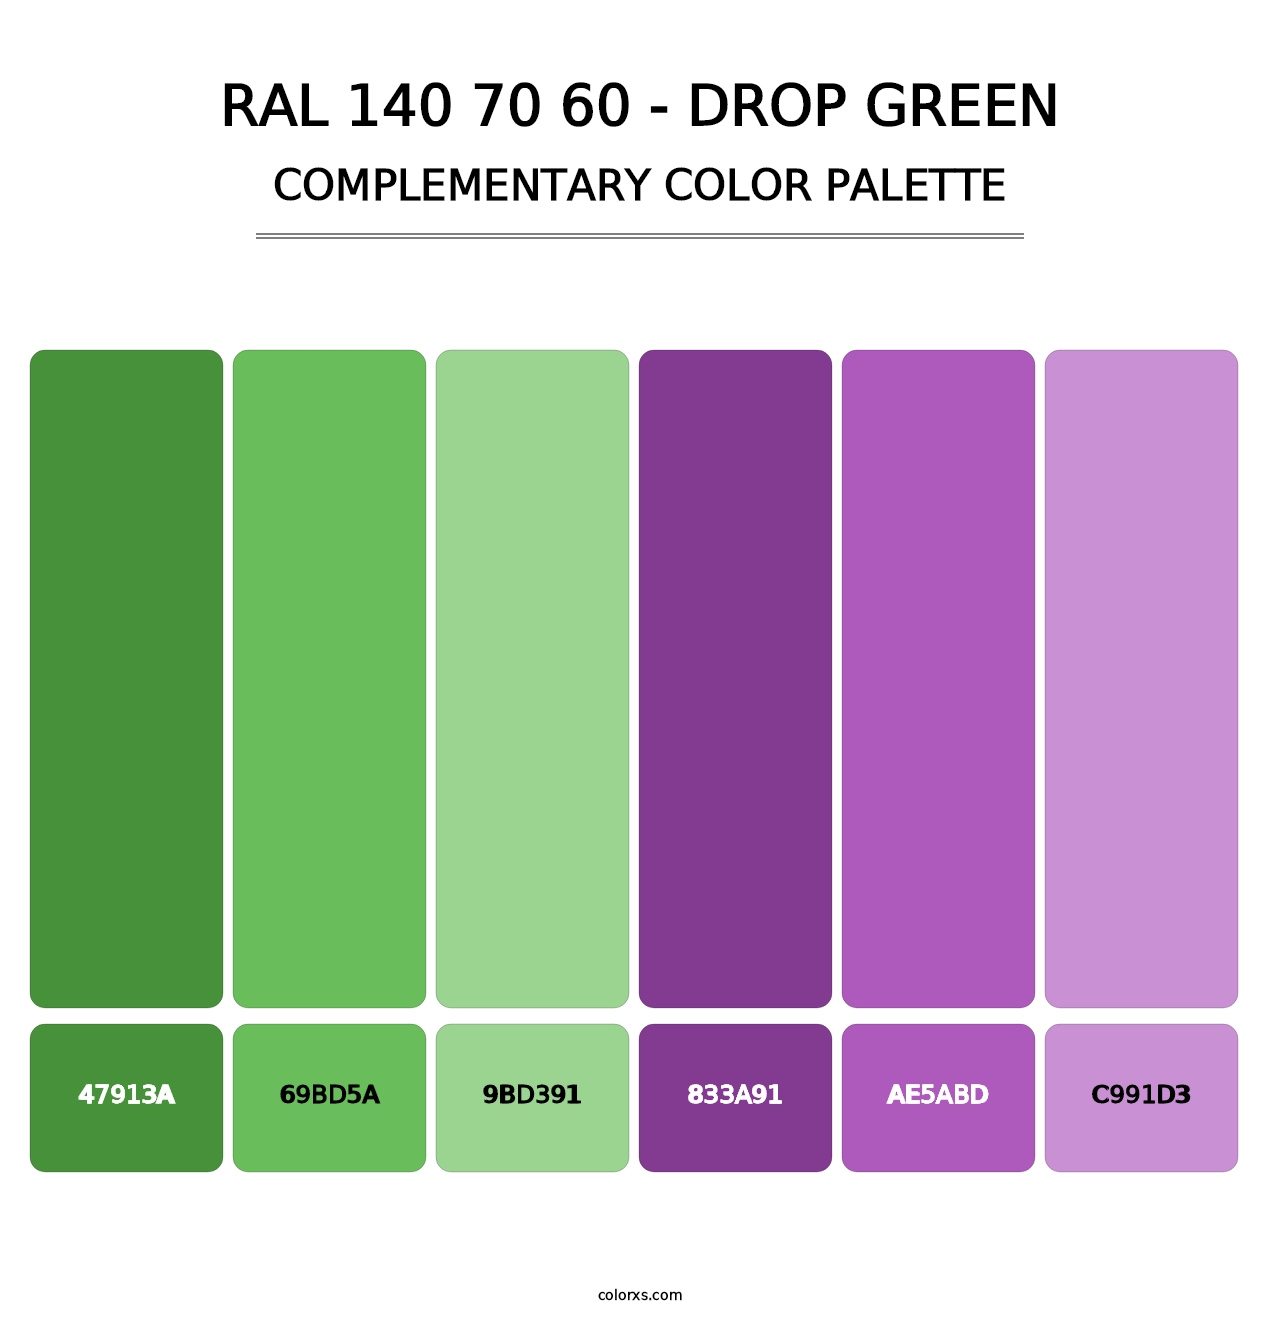 RAL 140 70 60 - Drop Green - Complementary Color Palette